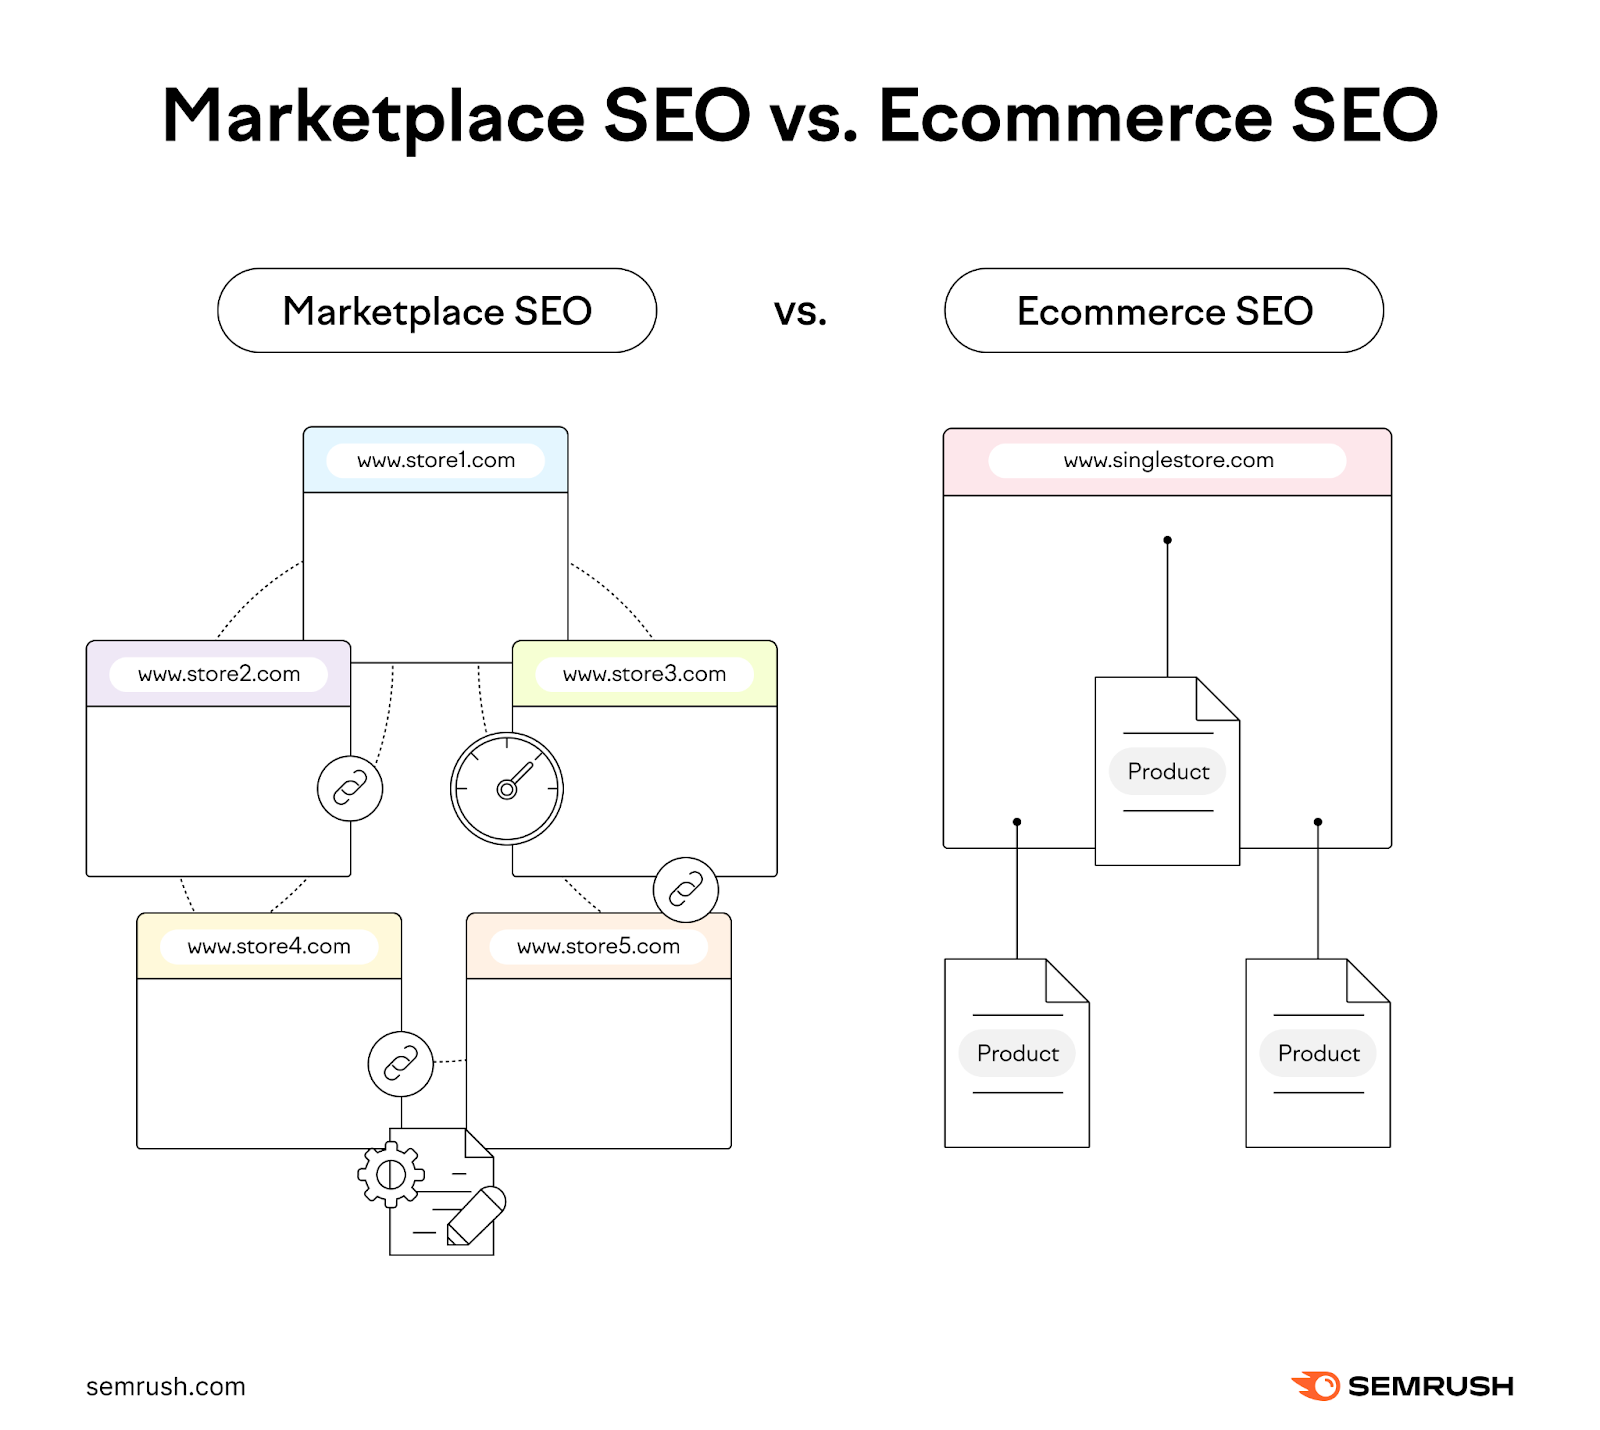 marketplace seo shows multiple domains linked together while ecommerce seo has a single store domain with product pages